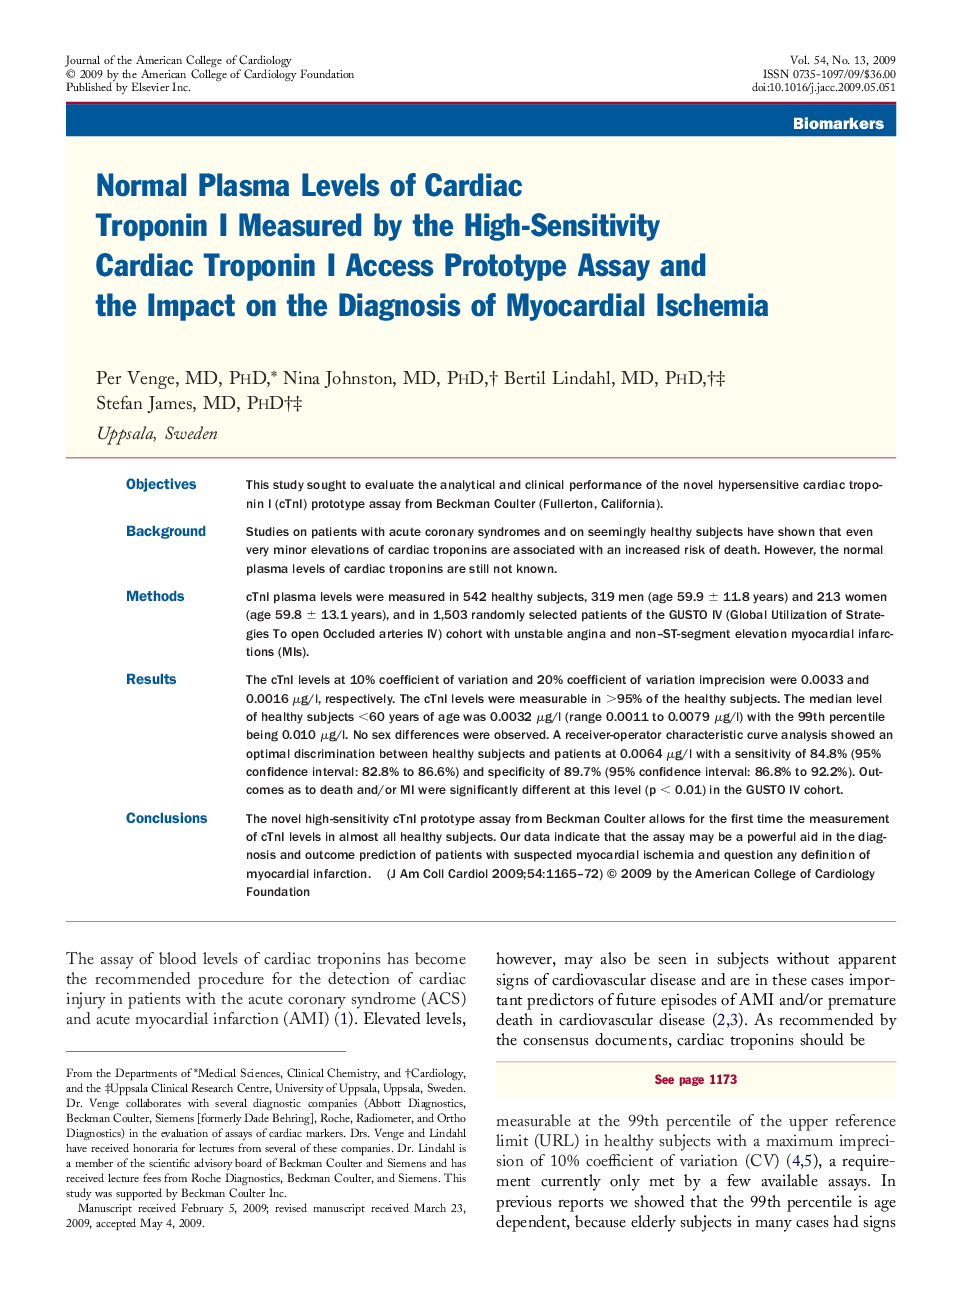 Normal Plasma Levels of Cardiac Troponin I Measured by the High-Sensitivity Cardiac Troponin I Access Prototype Assay and the Impact on the Diagnosis of Myocardial Ischemia 